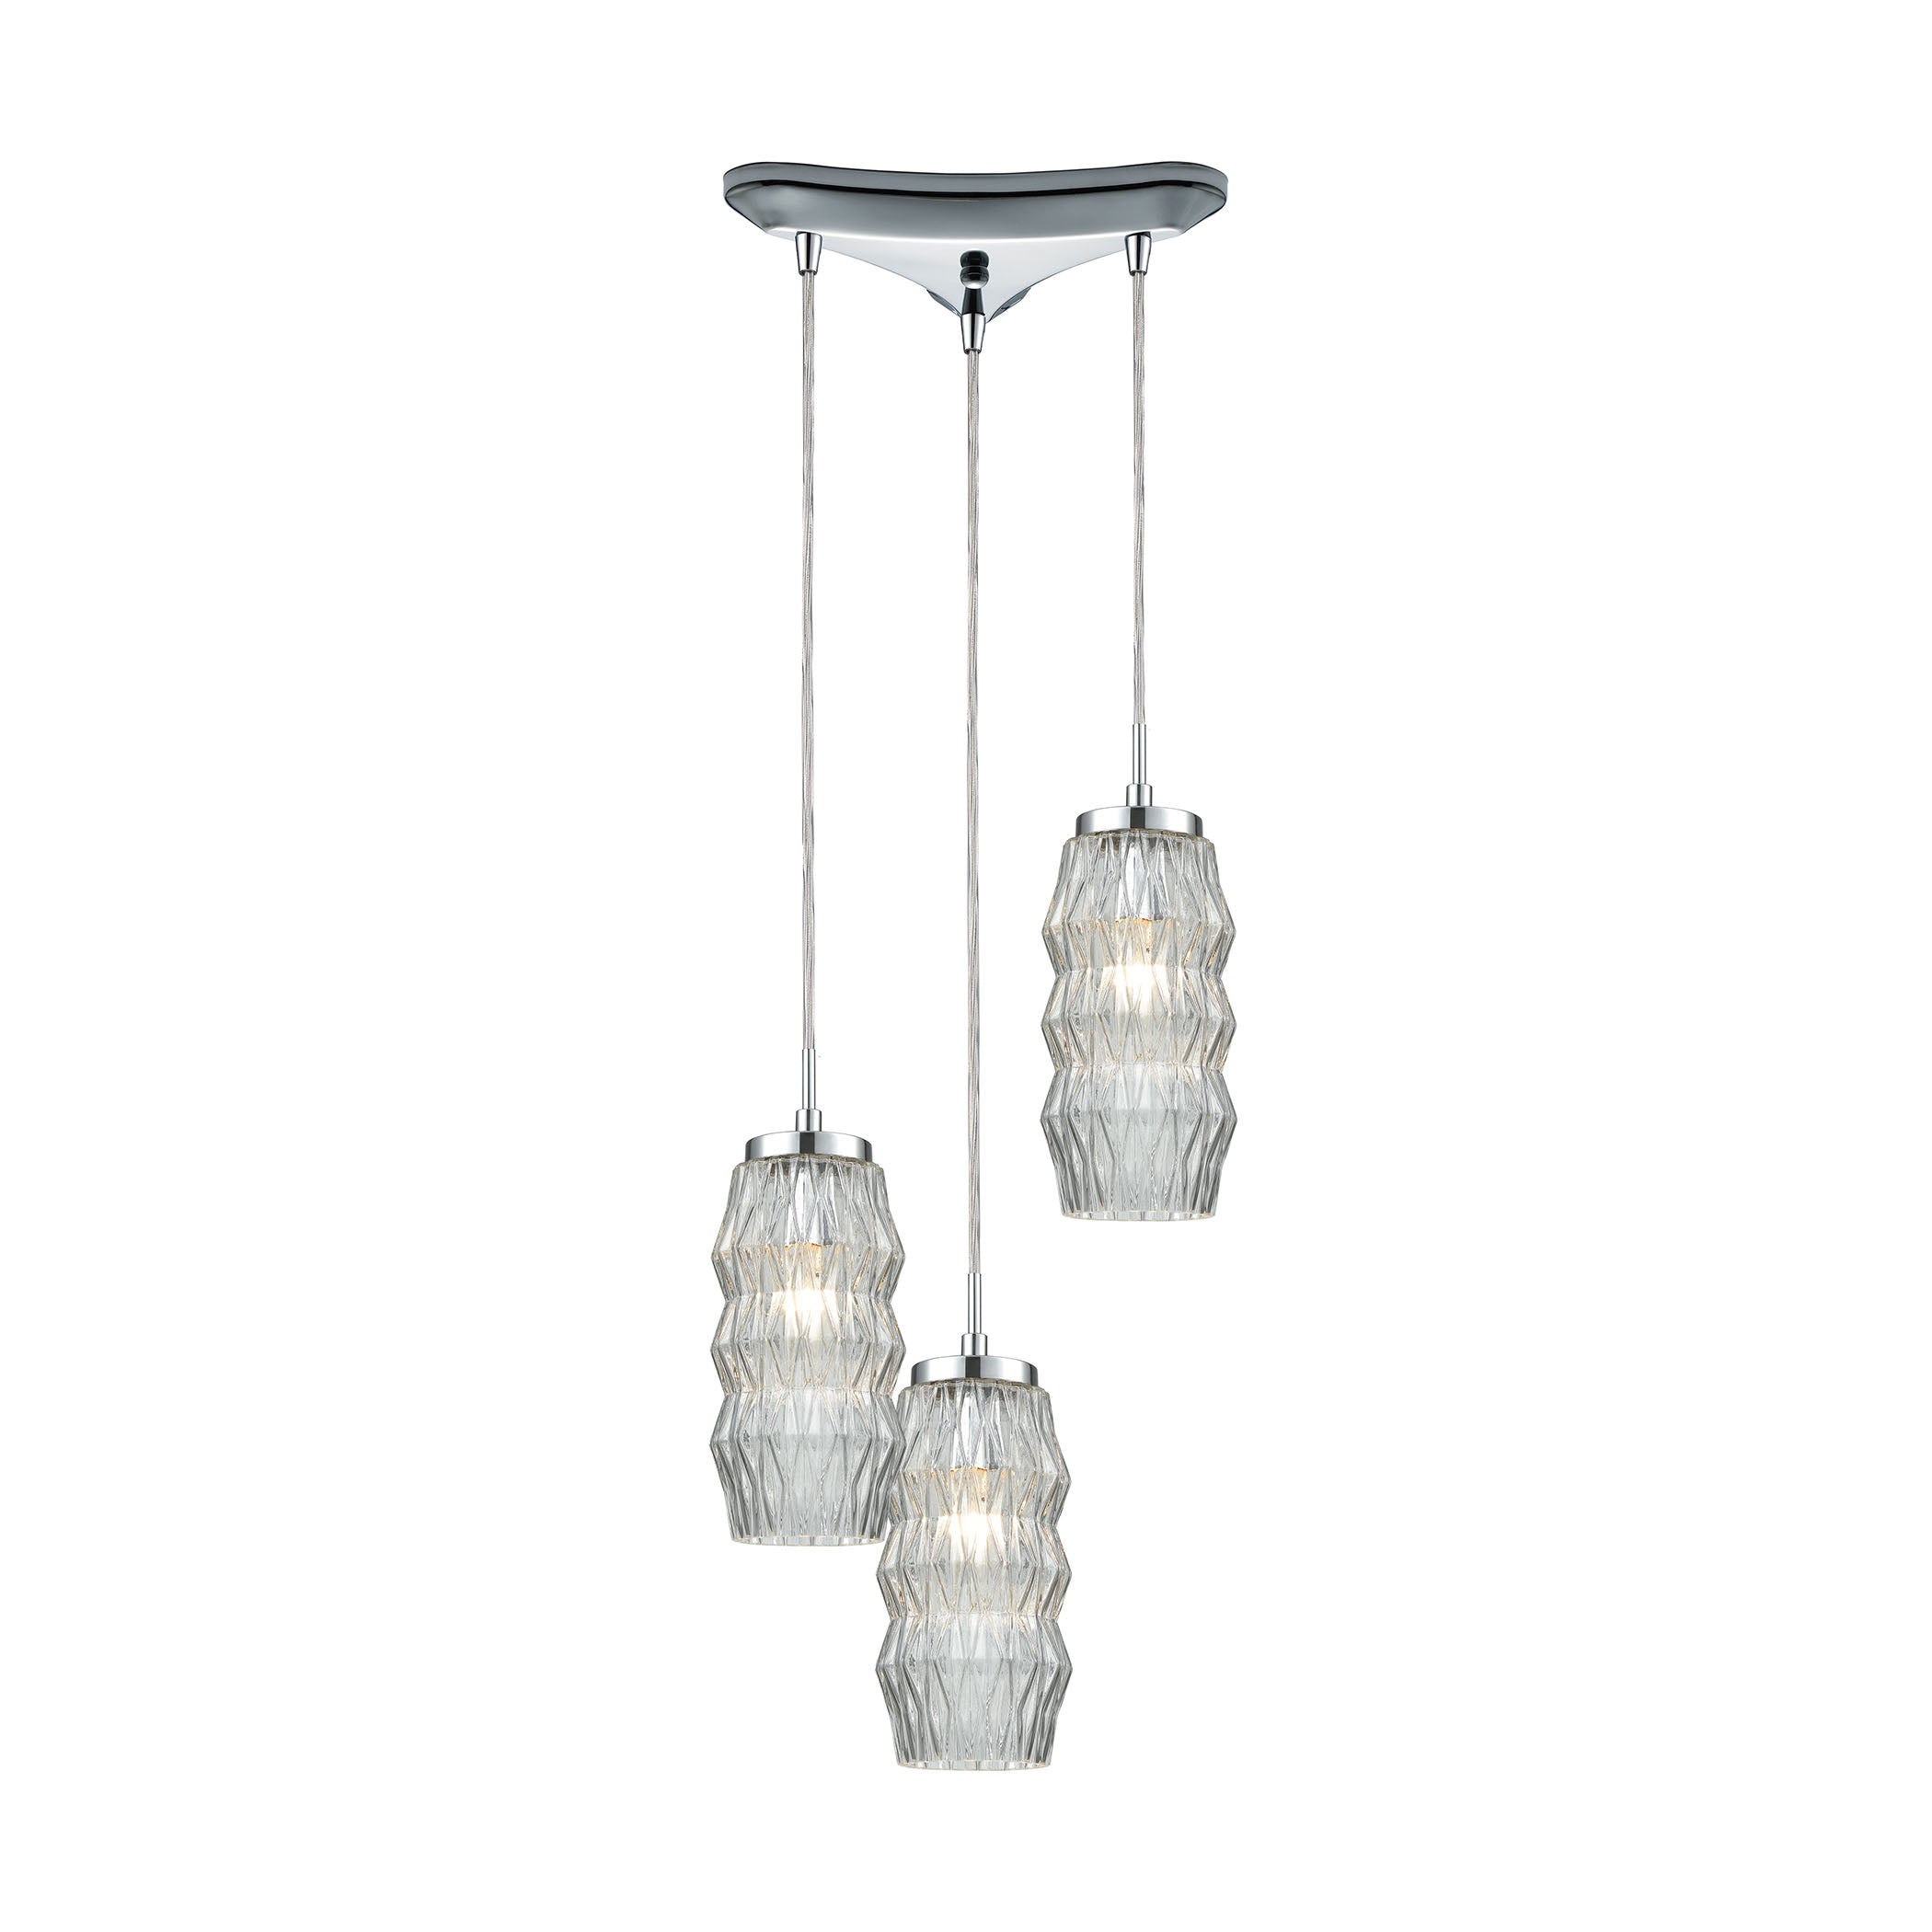 ELK Lighting 56650/3 Zigzag 3-Light Triangular Pendant Fixture in Polished Chrome with Clear Patterned Glass